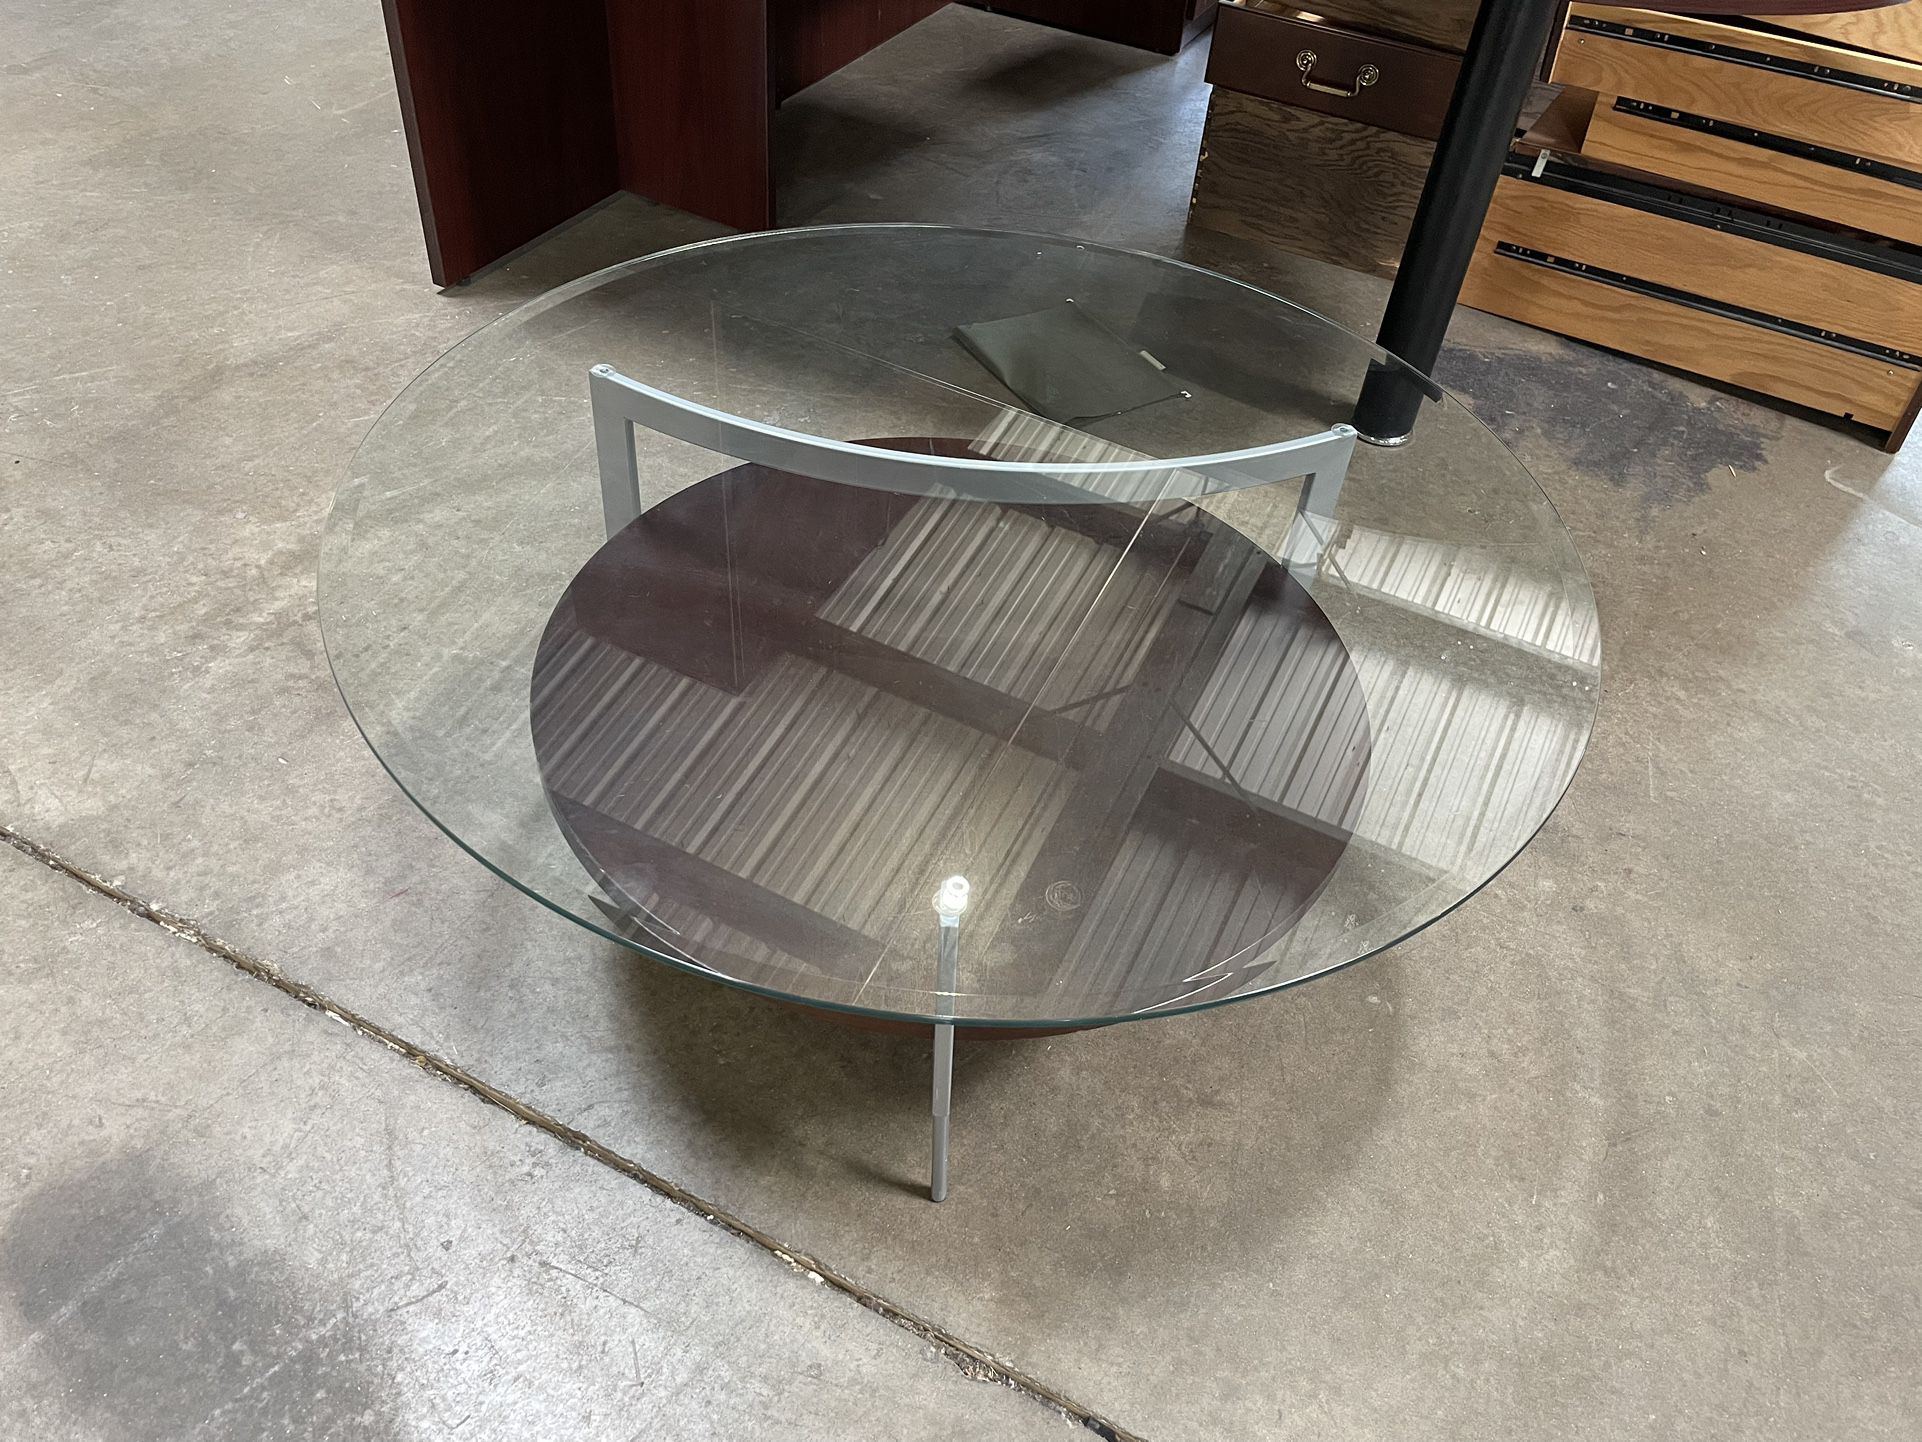 Dark Wood And Glass Coffee Table! Only $25!